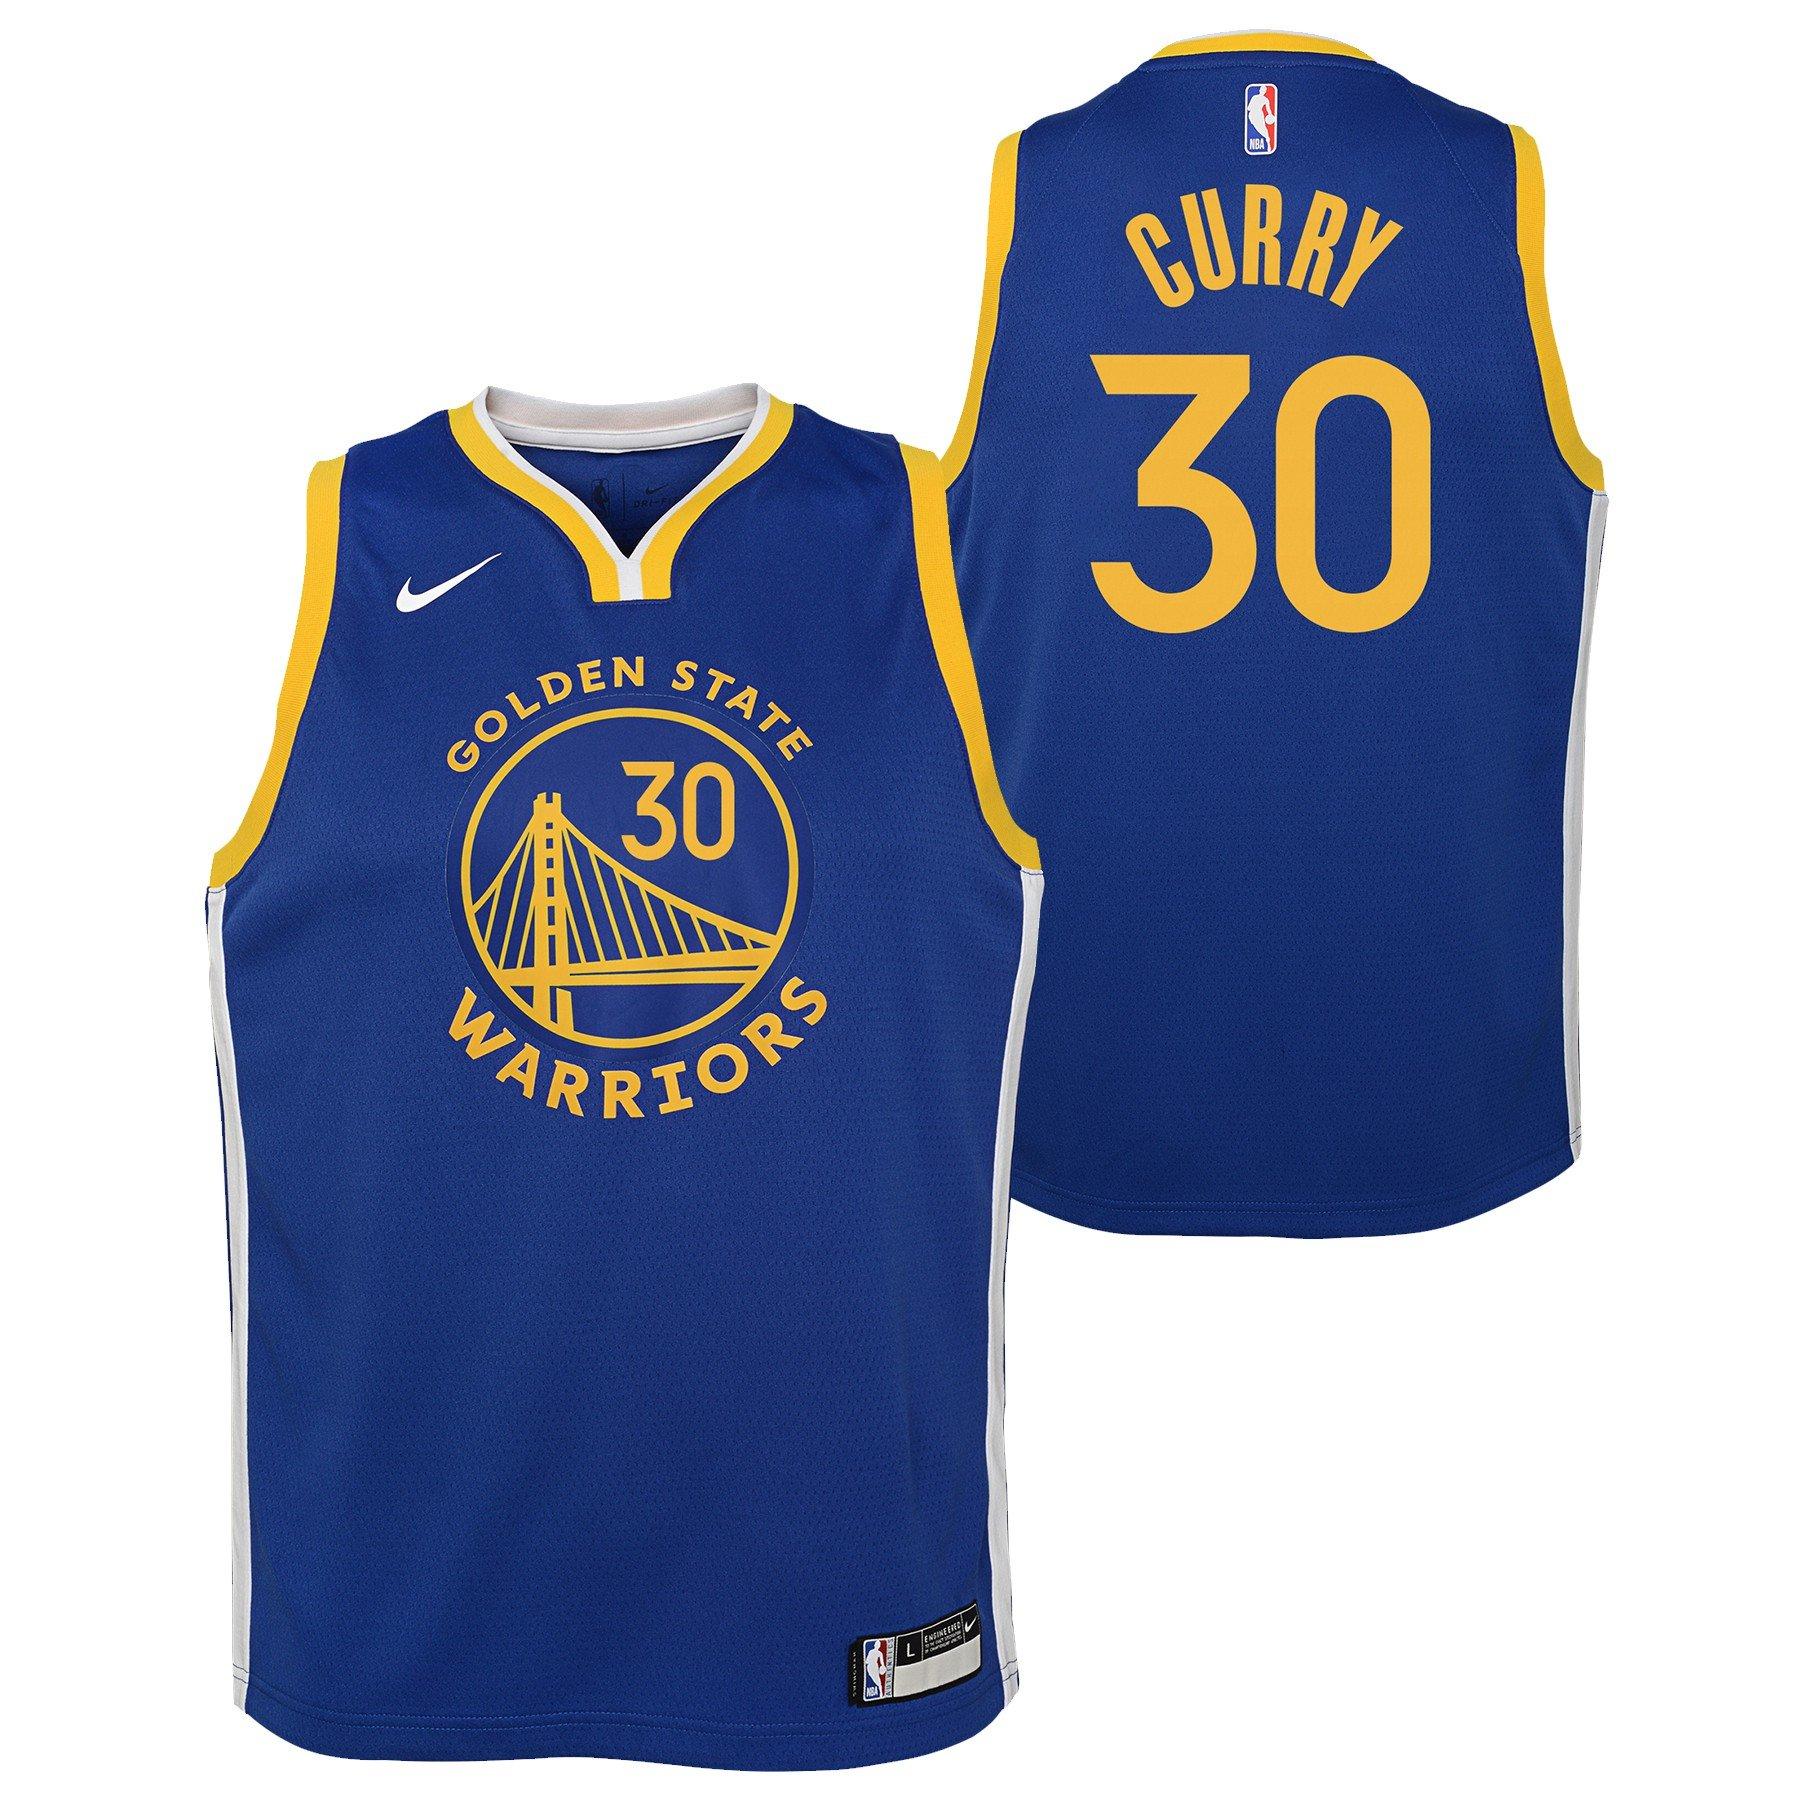 golden state warriors clothing